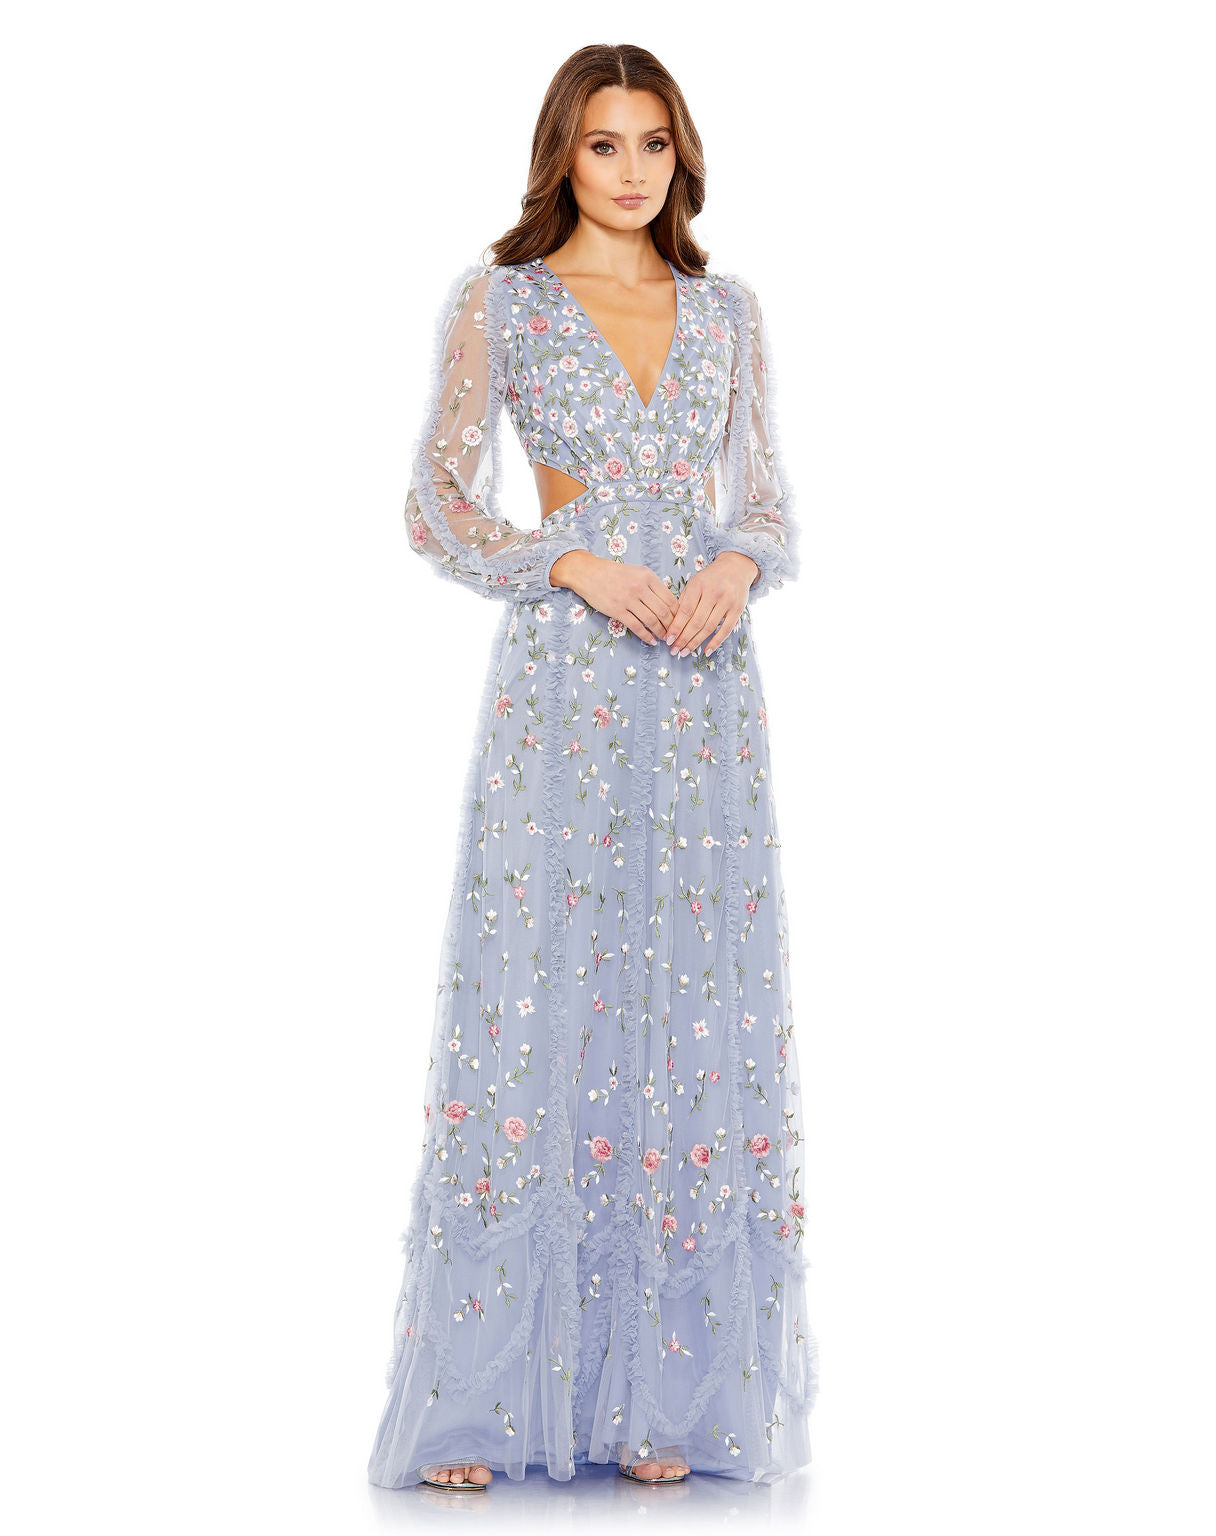 Prom Dresses Long Sleeve Floral Cut Out Formal Prom Dress Periwinkle